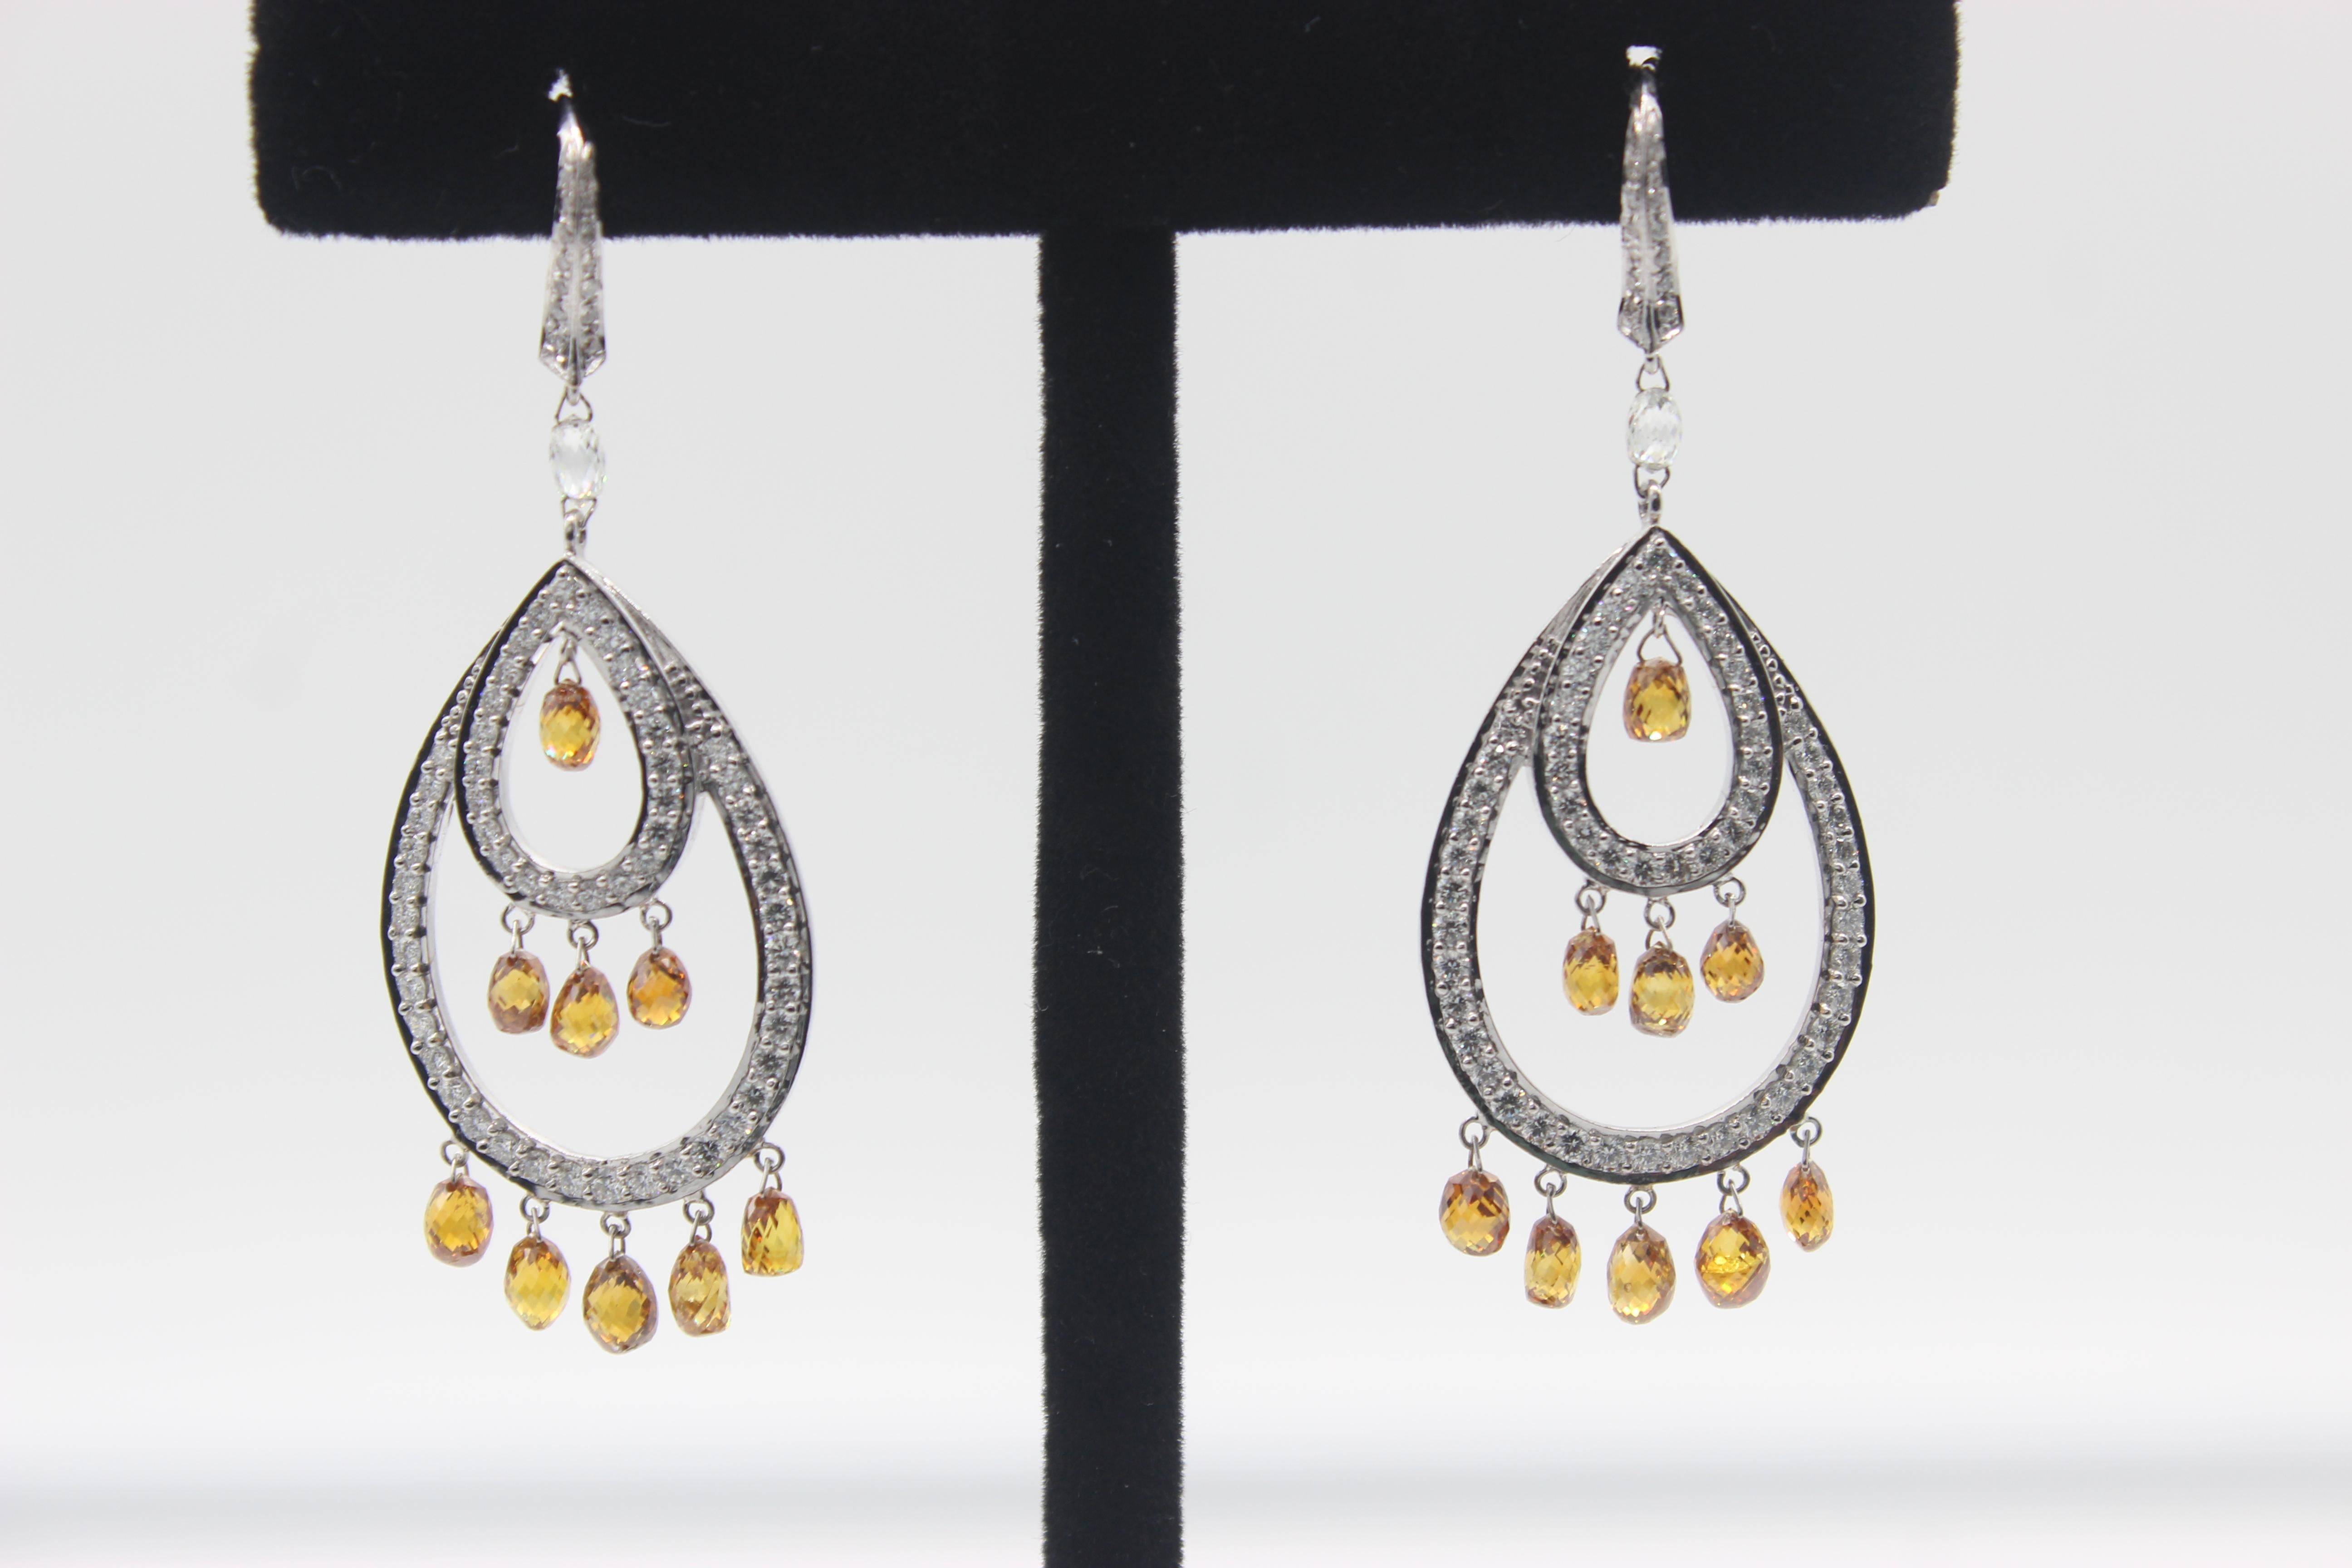 PANIM Champage Briolettes Diamond  Dangler Earrings 18 Karat White Gold



These stunning Champage briolette dangler diamond earrings are One of a kind and handmade.

They are crafted in 18kt white gold, this pair of dangler earrings features a